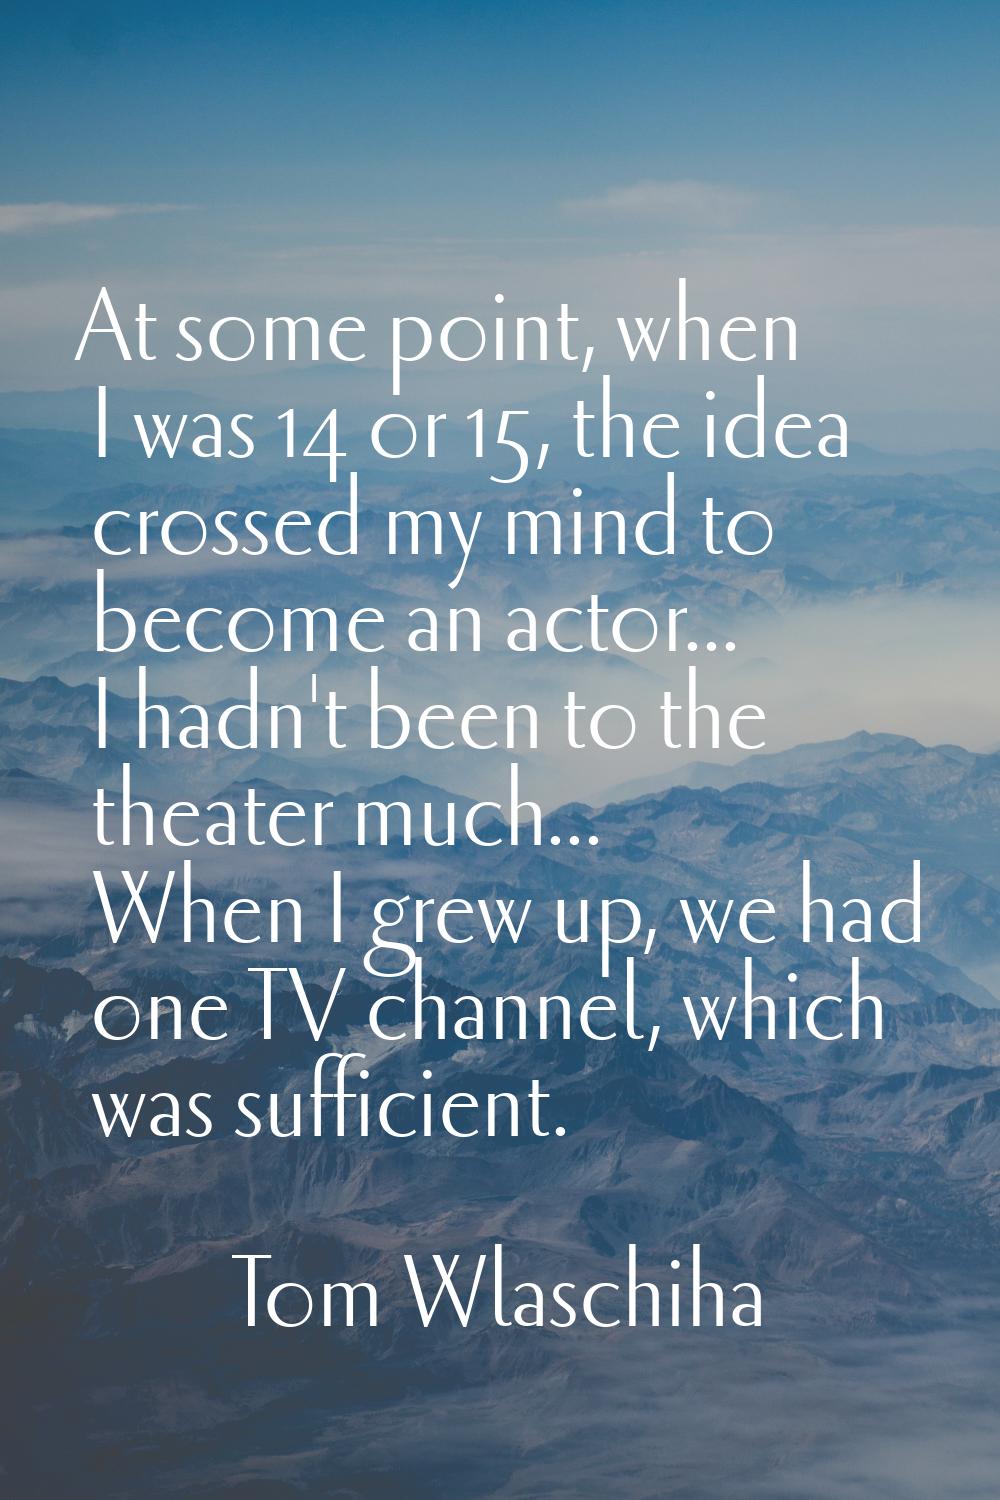 At some point, when I was 14 or 15, the idea crossed my mind to become an actor... I hadn't been to